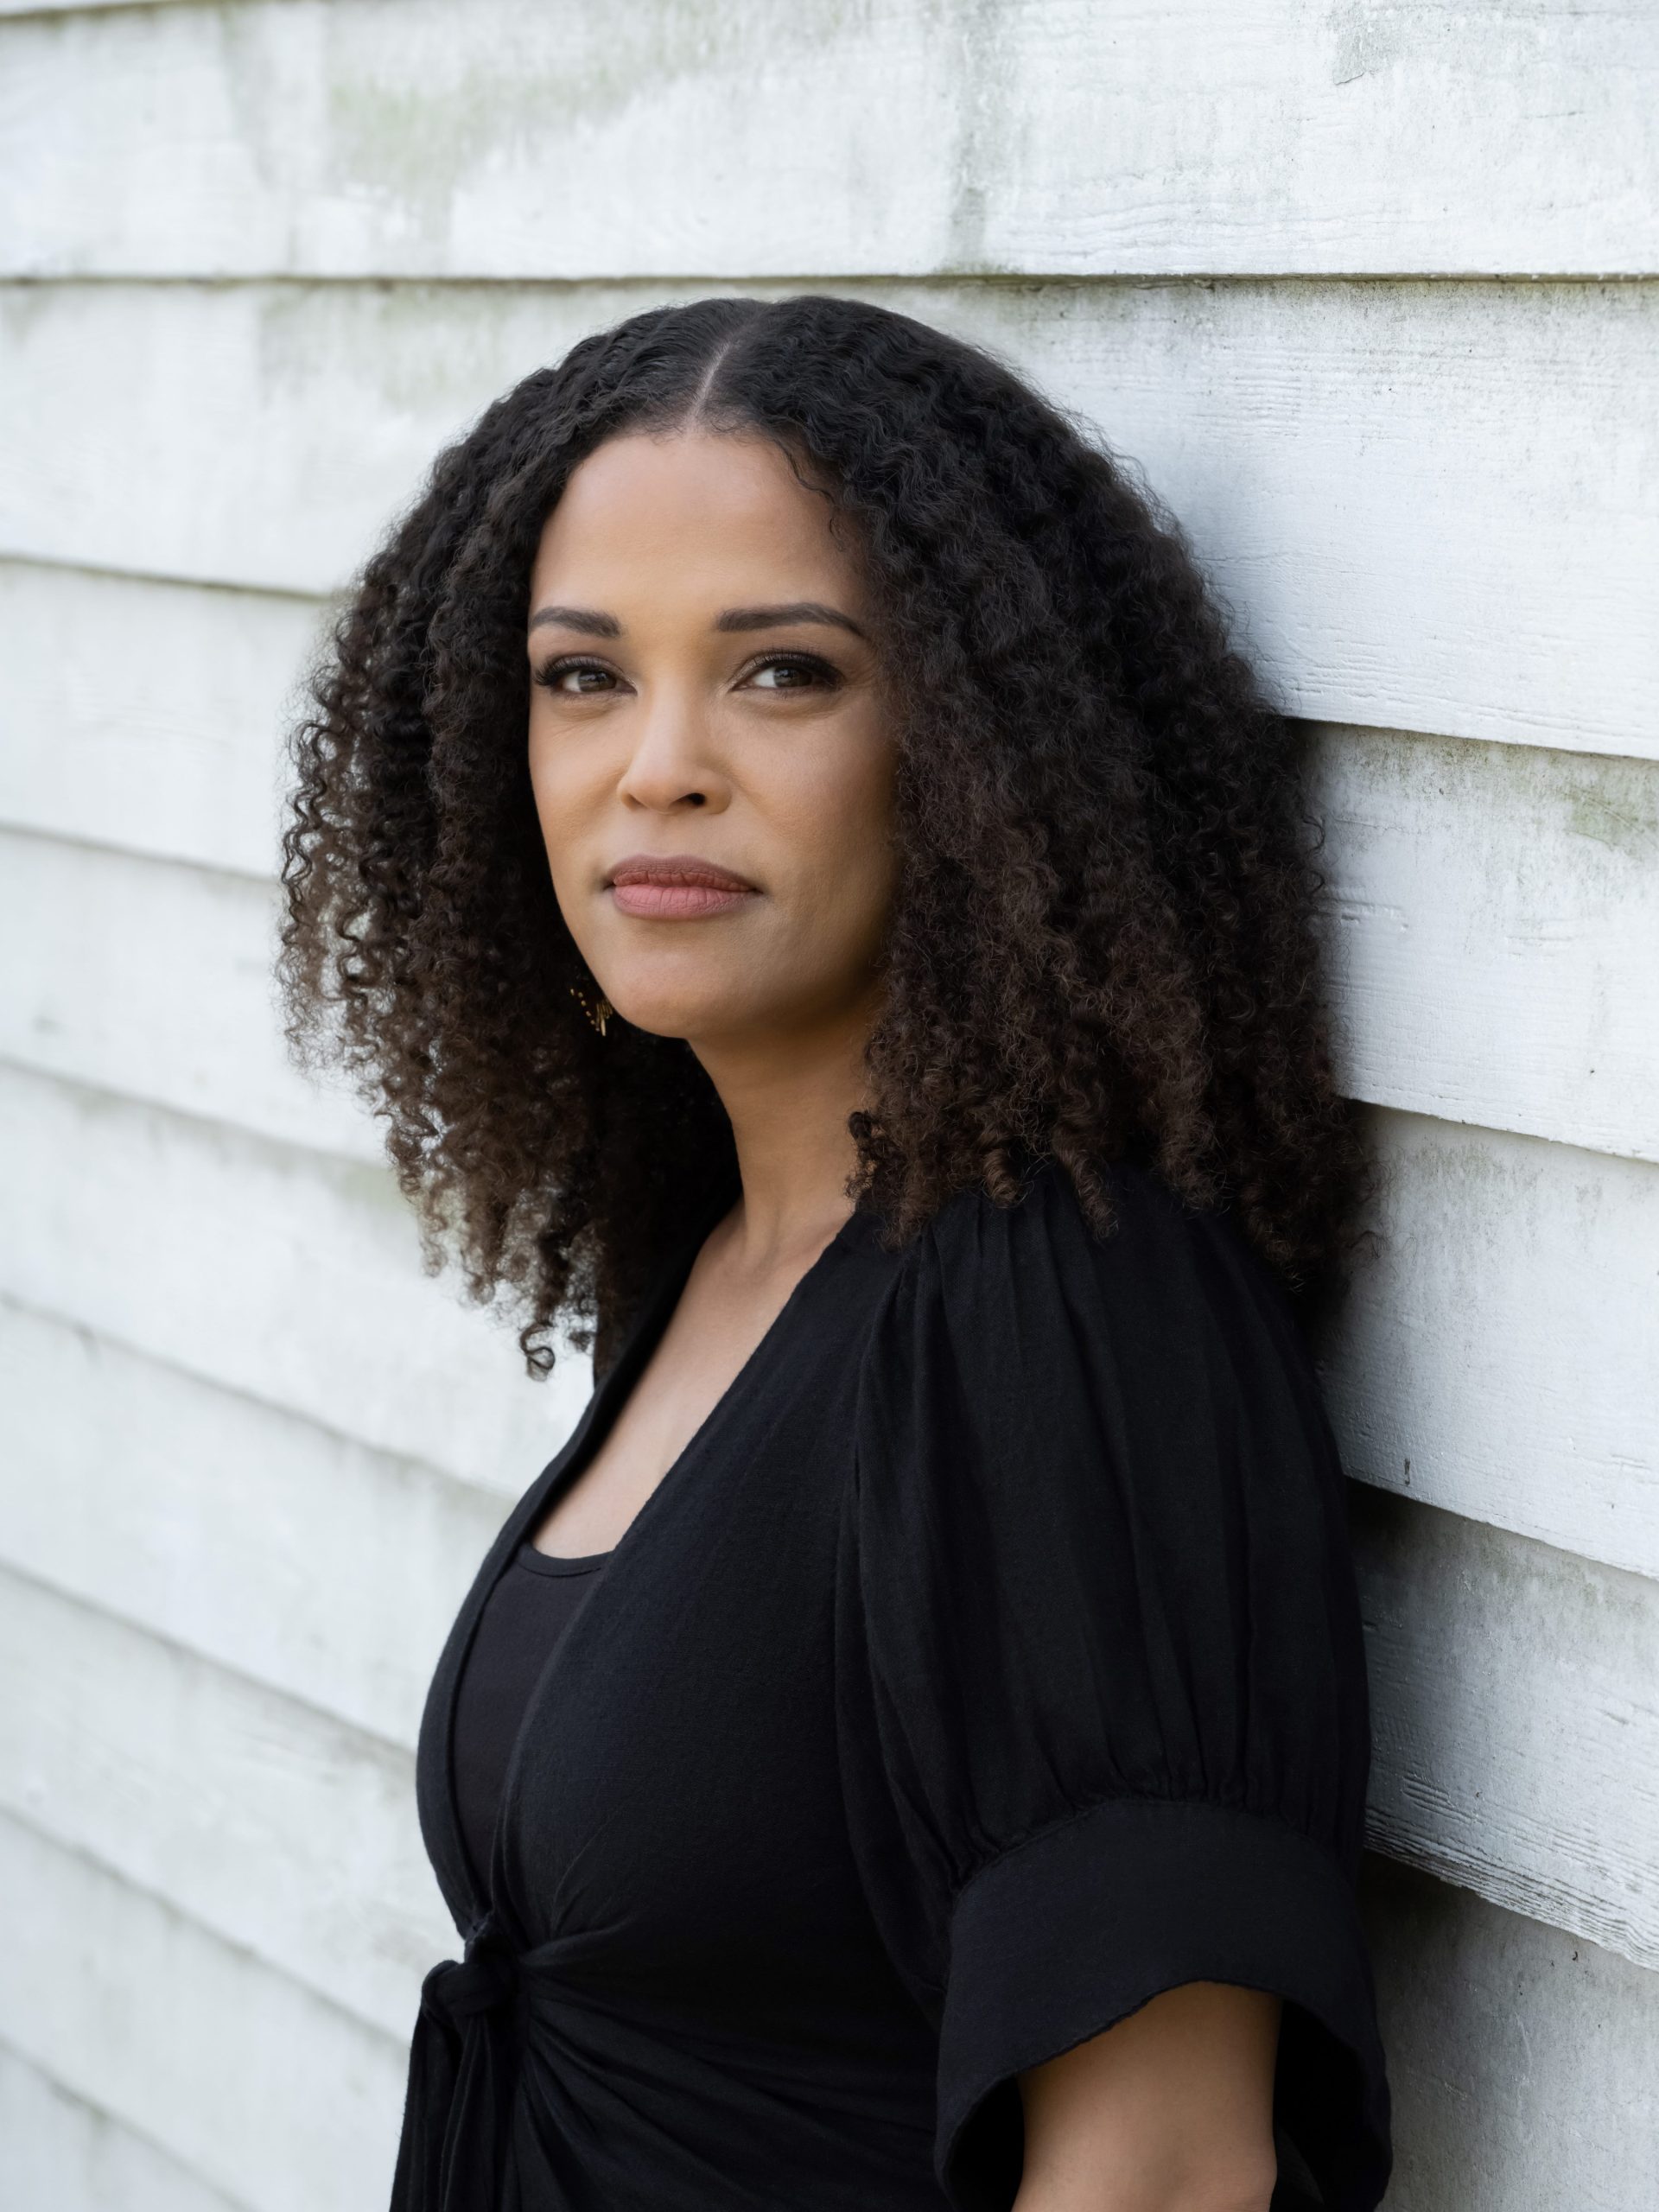 Jesmyn Ward looks at the camera against a white barn with shiplap siding